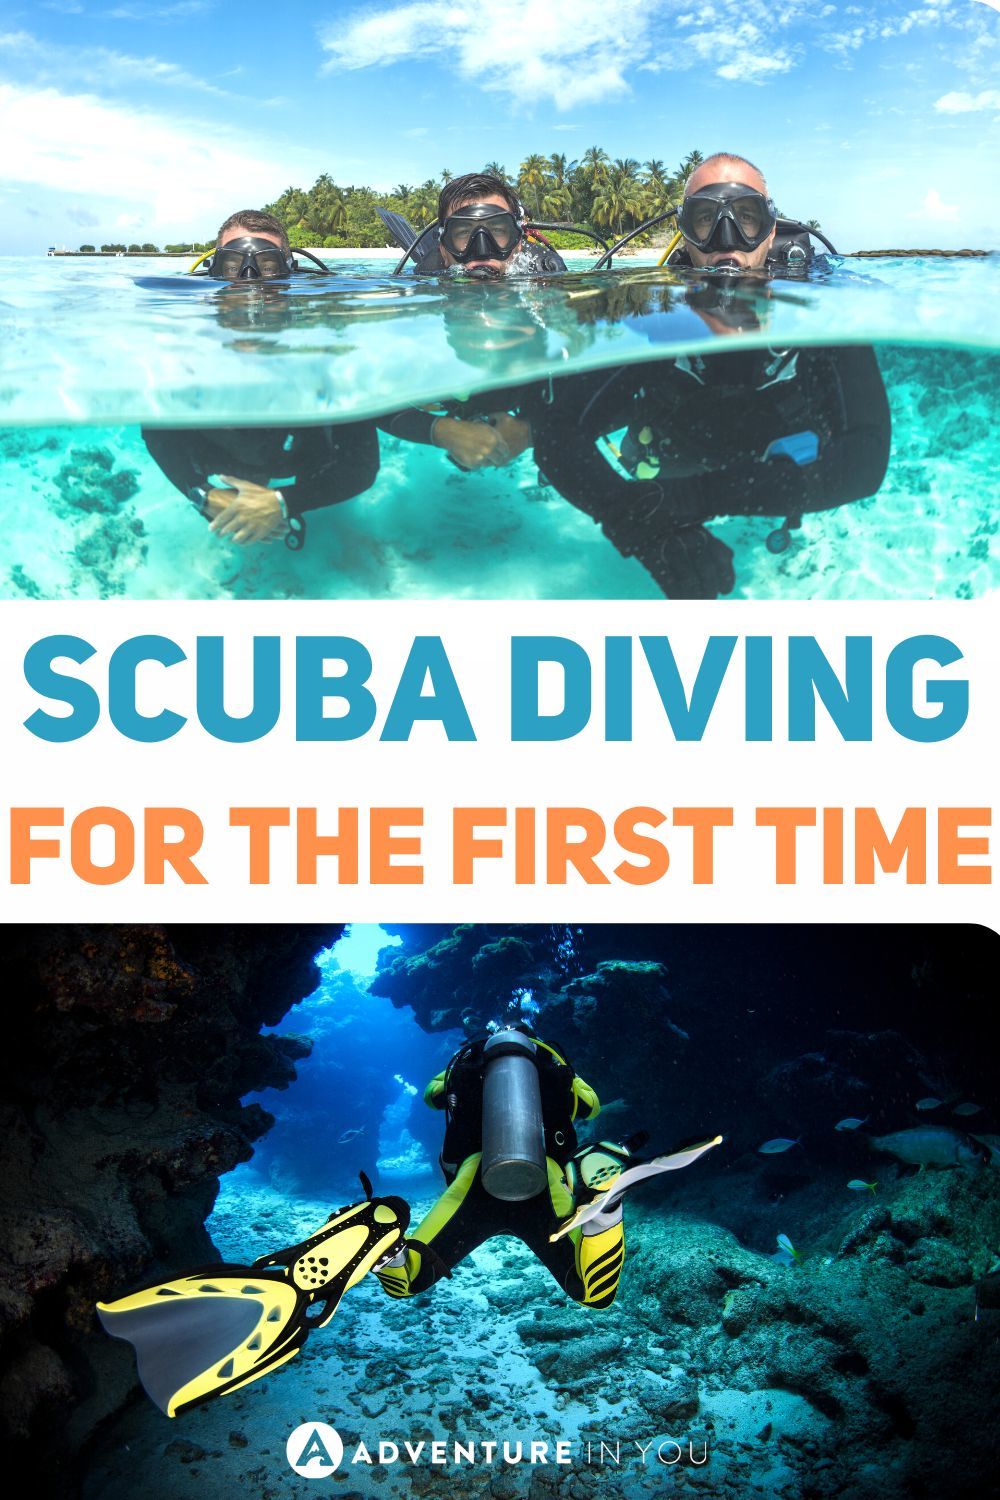 Scuba Diving for the First Time | Looking for a quick guide on scuba diving for the first time? Look no further as I’m going to fill you in on what to expect. #scubadiving #diving #scuba